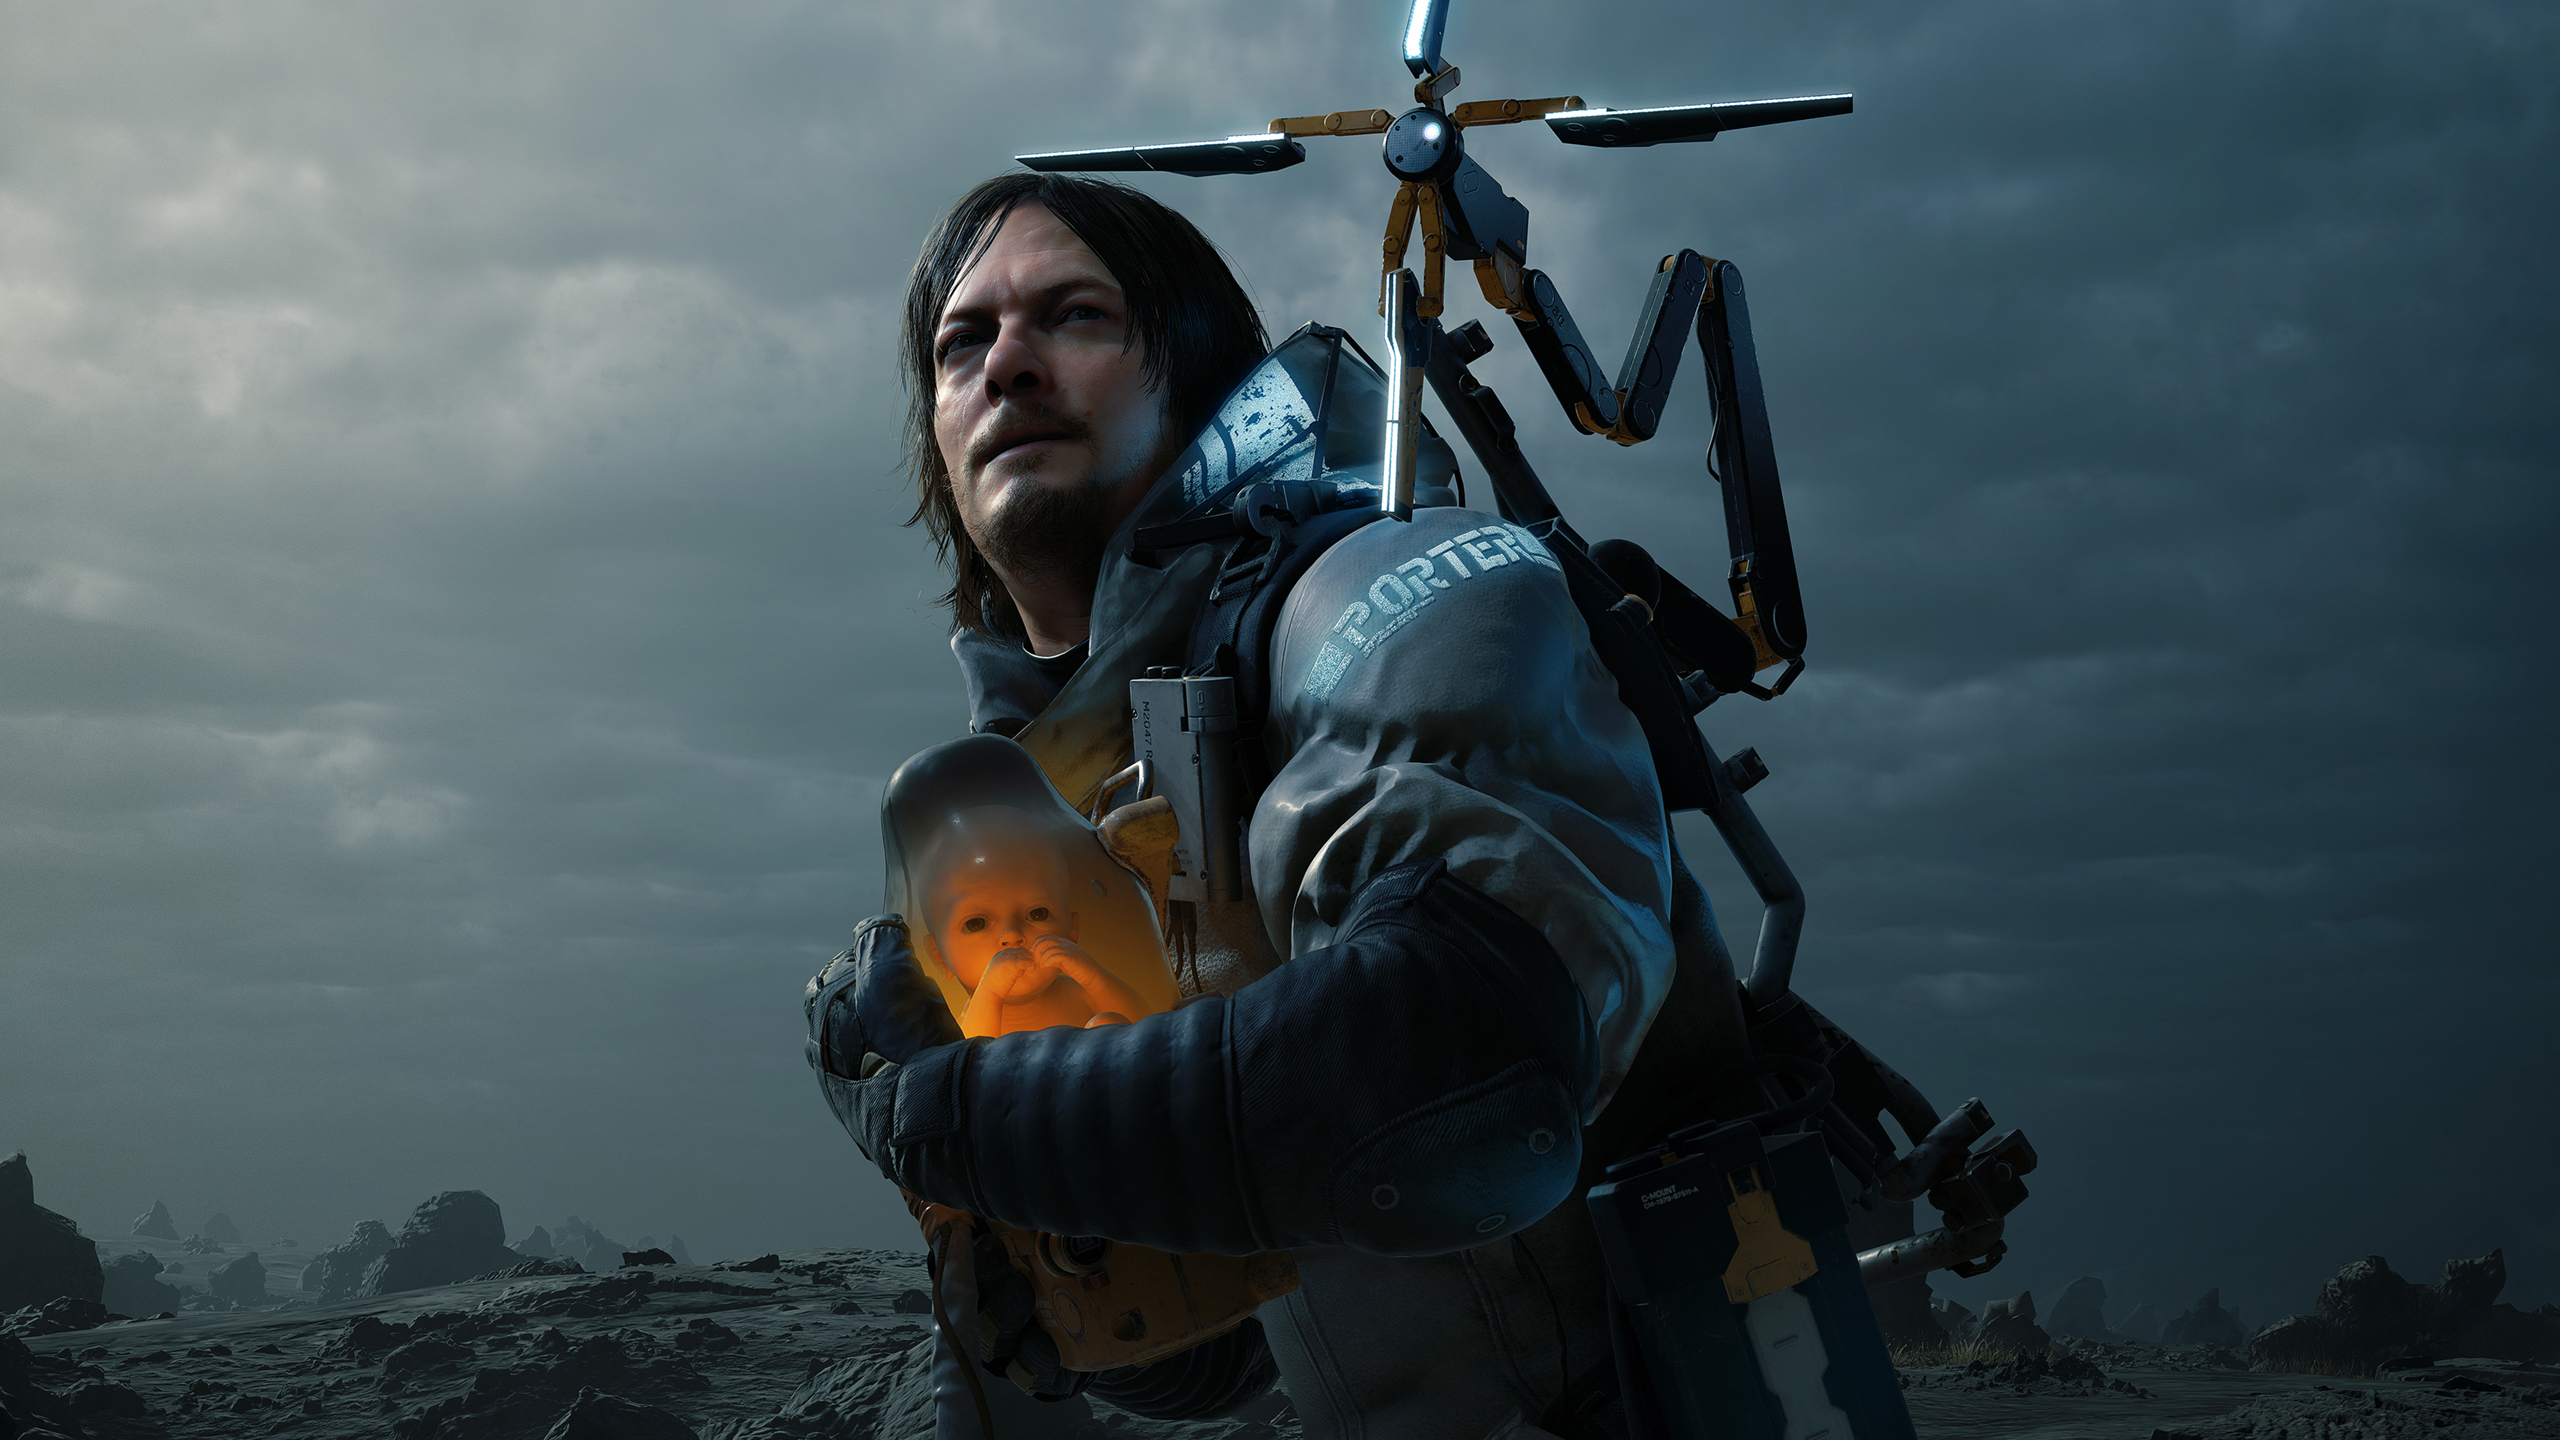 Death Stranding bundled free with Nvidia RTX GPUs starting today | PC Gamer